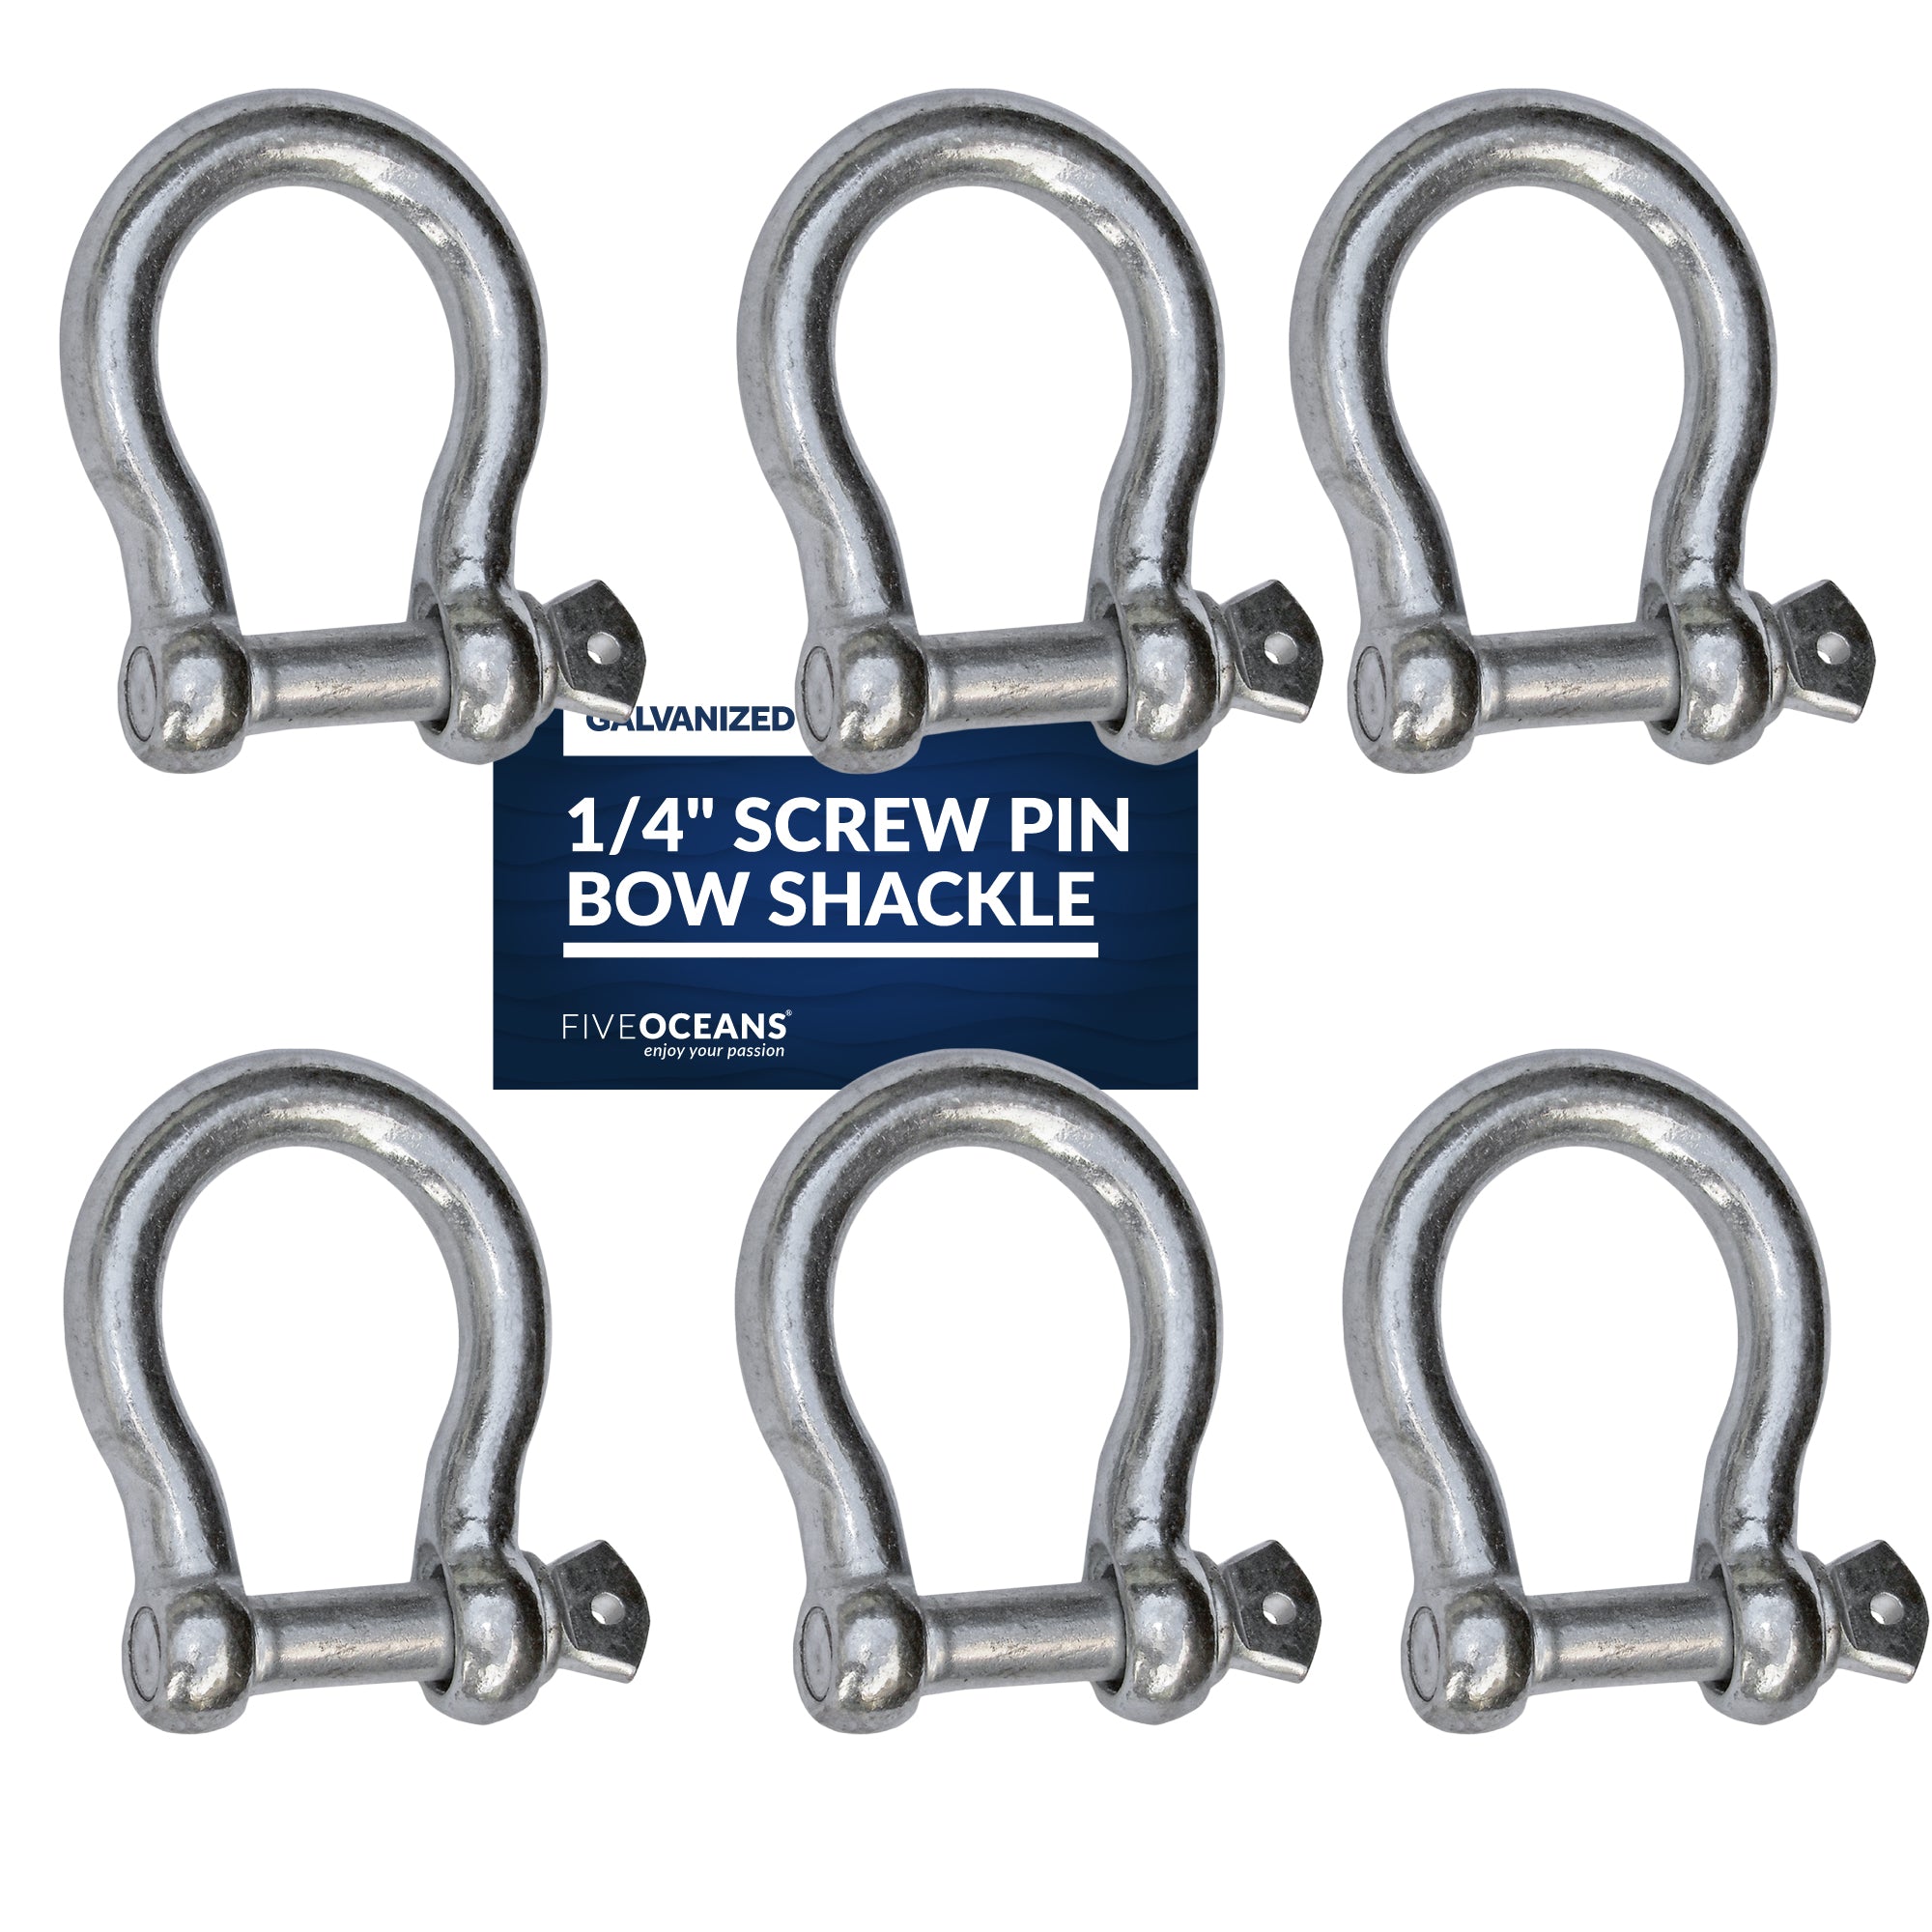 Pin Bow Shackles, 1/4" Galvanized 6-Pack - FO432-M6